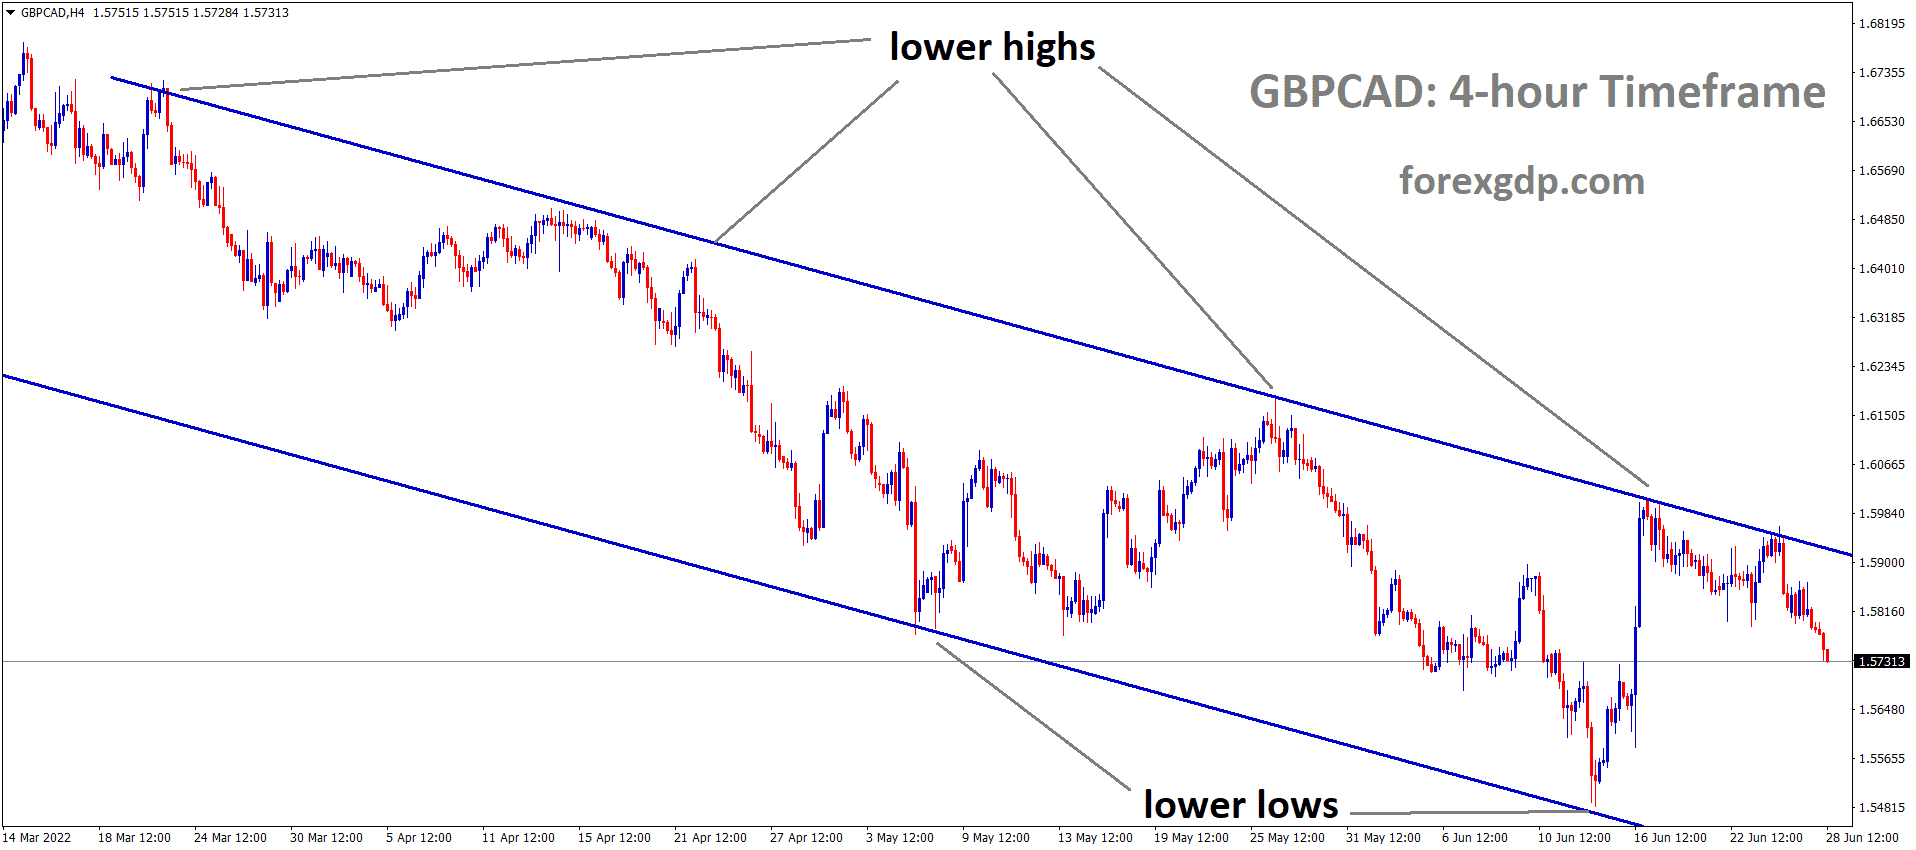 GBPCAD is moving in the Descending channel and the Market has fallen from the Lower high area of the channel